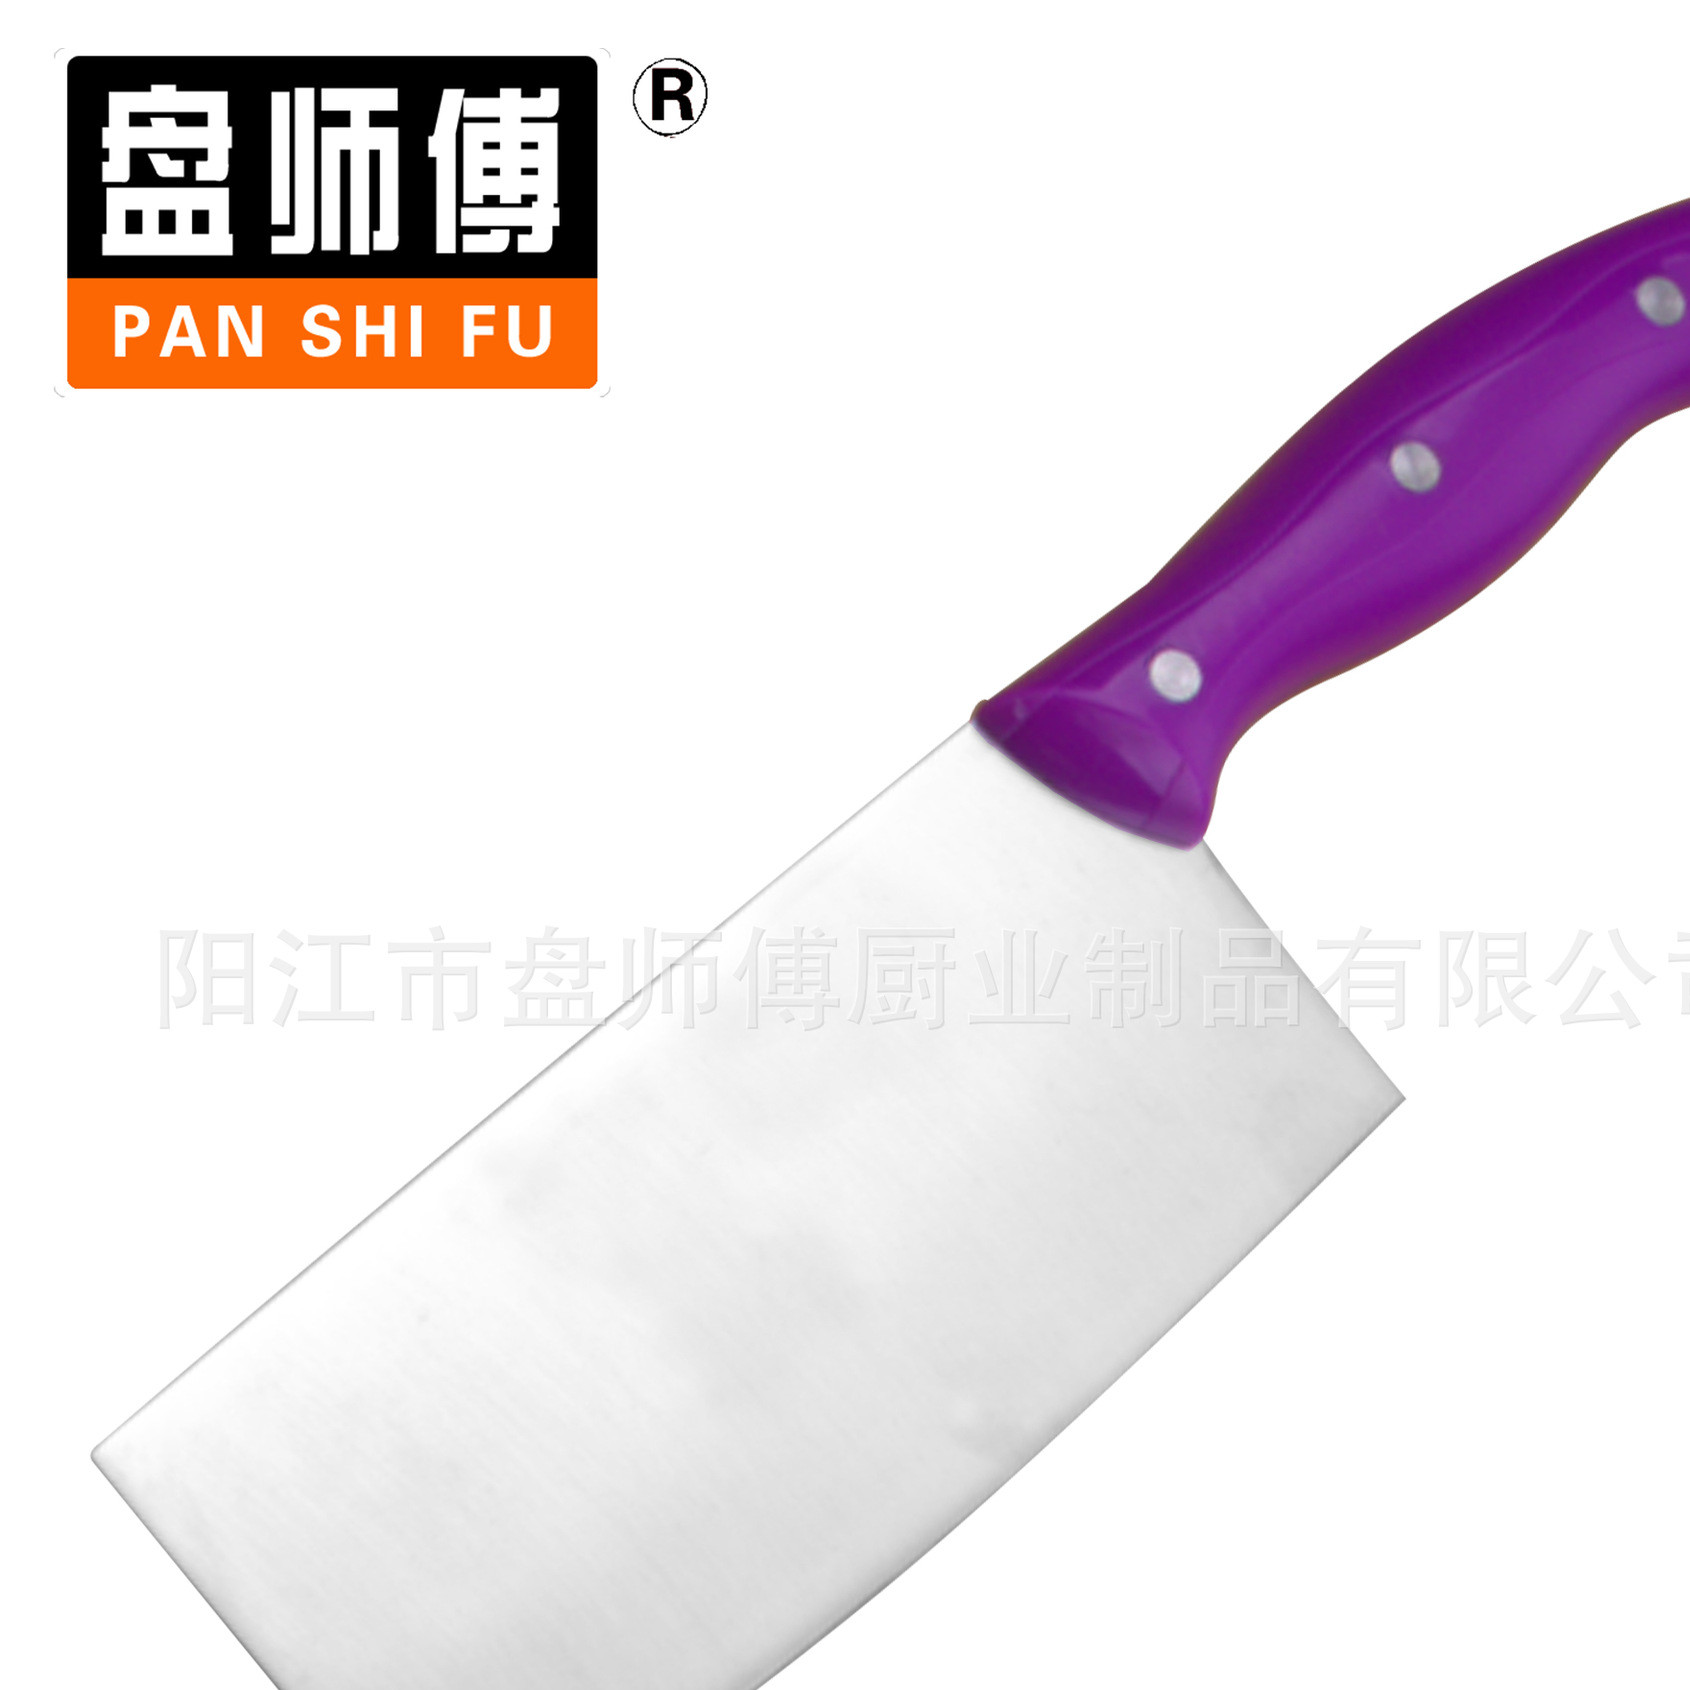 Yangjiang plate master factory direct selling products retail wholesale kitchen knife advantage of the purple knife